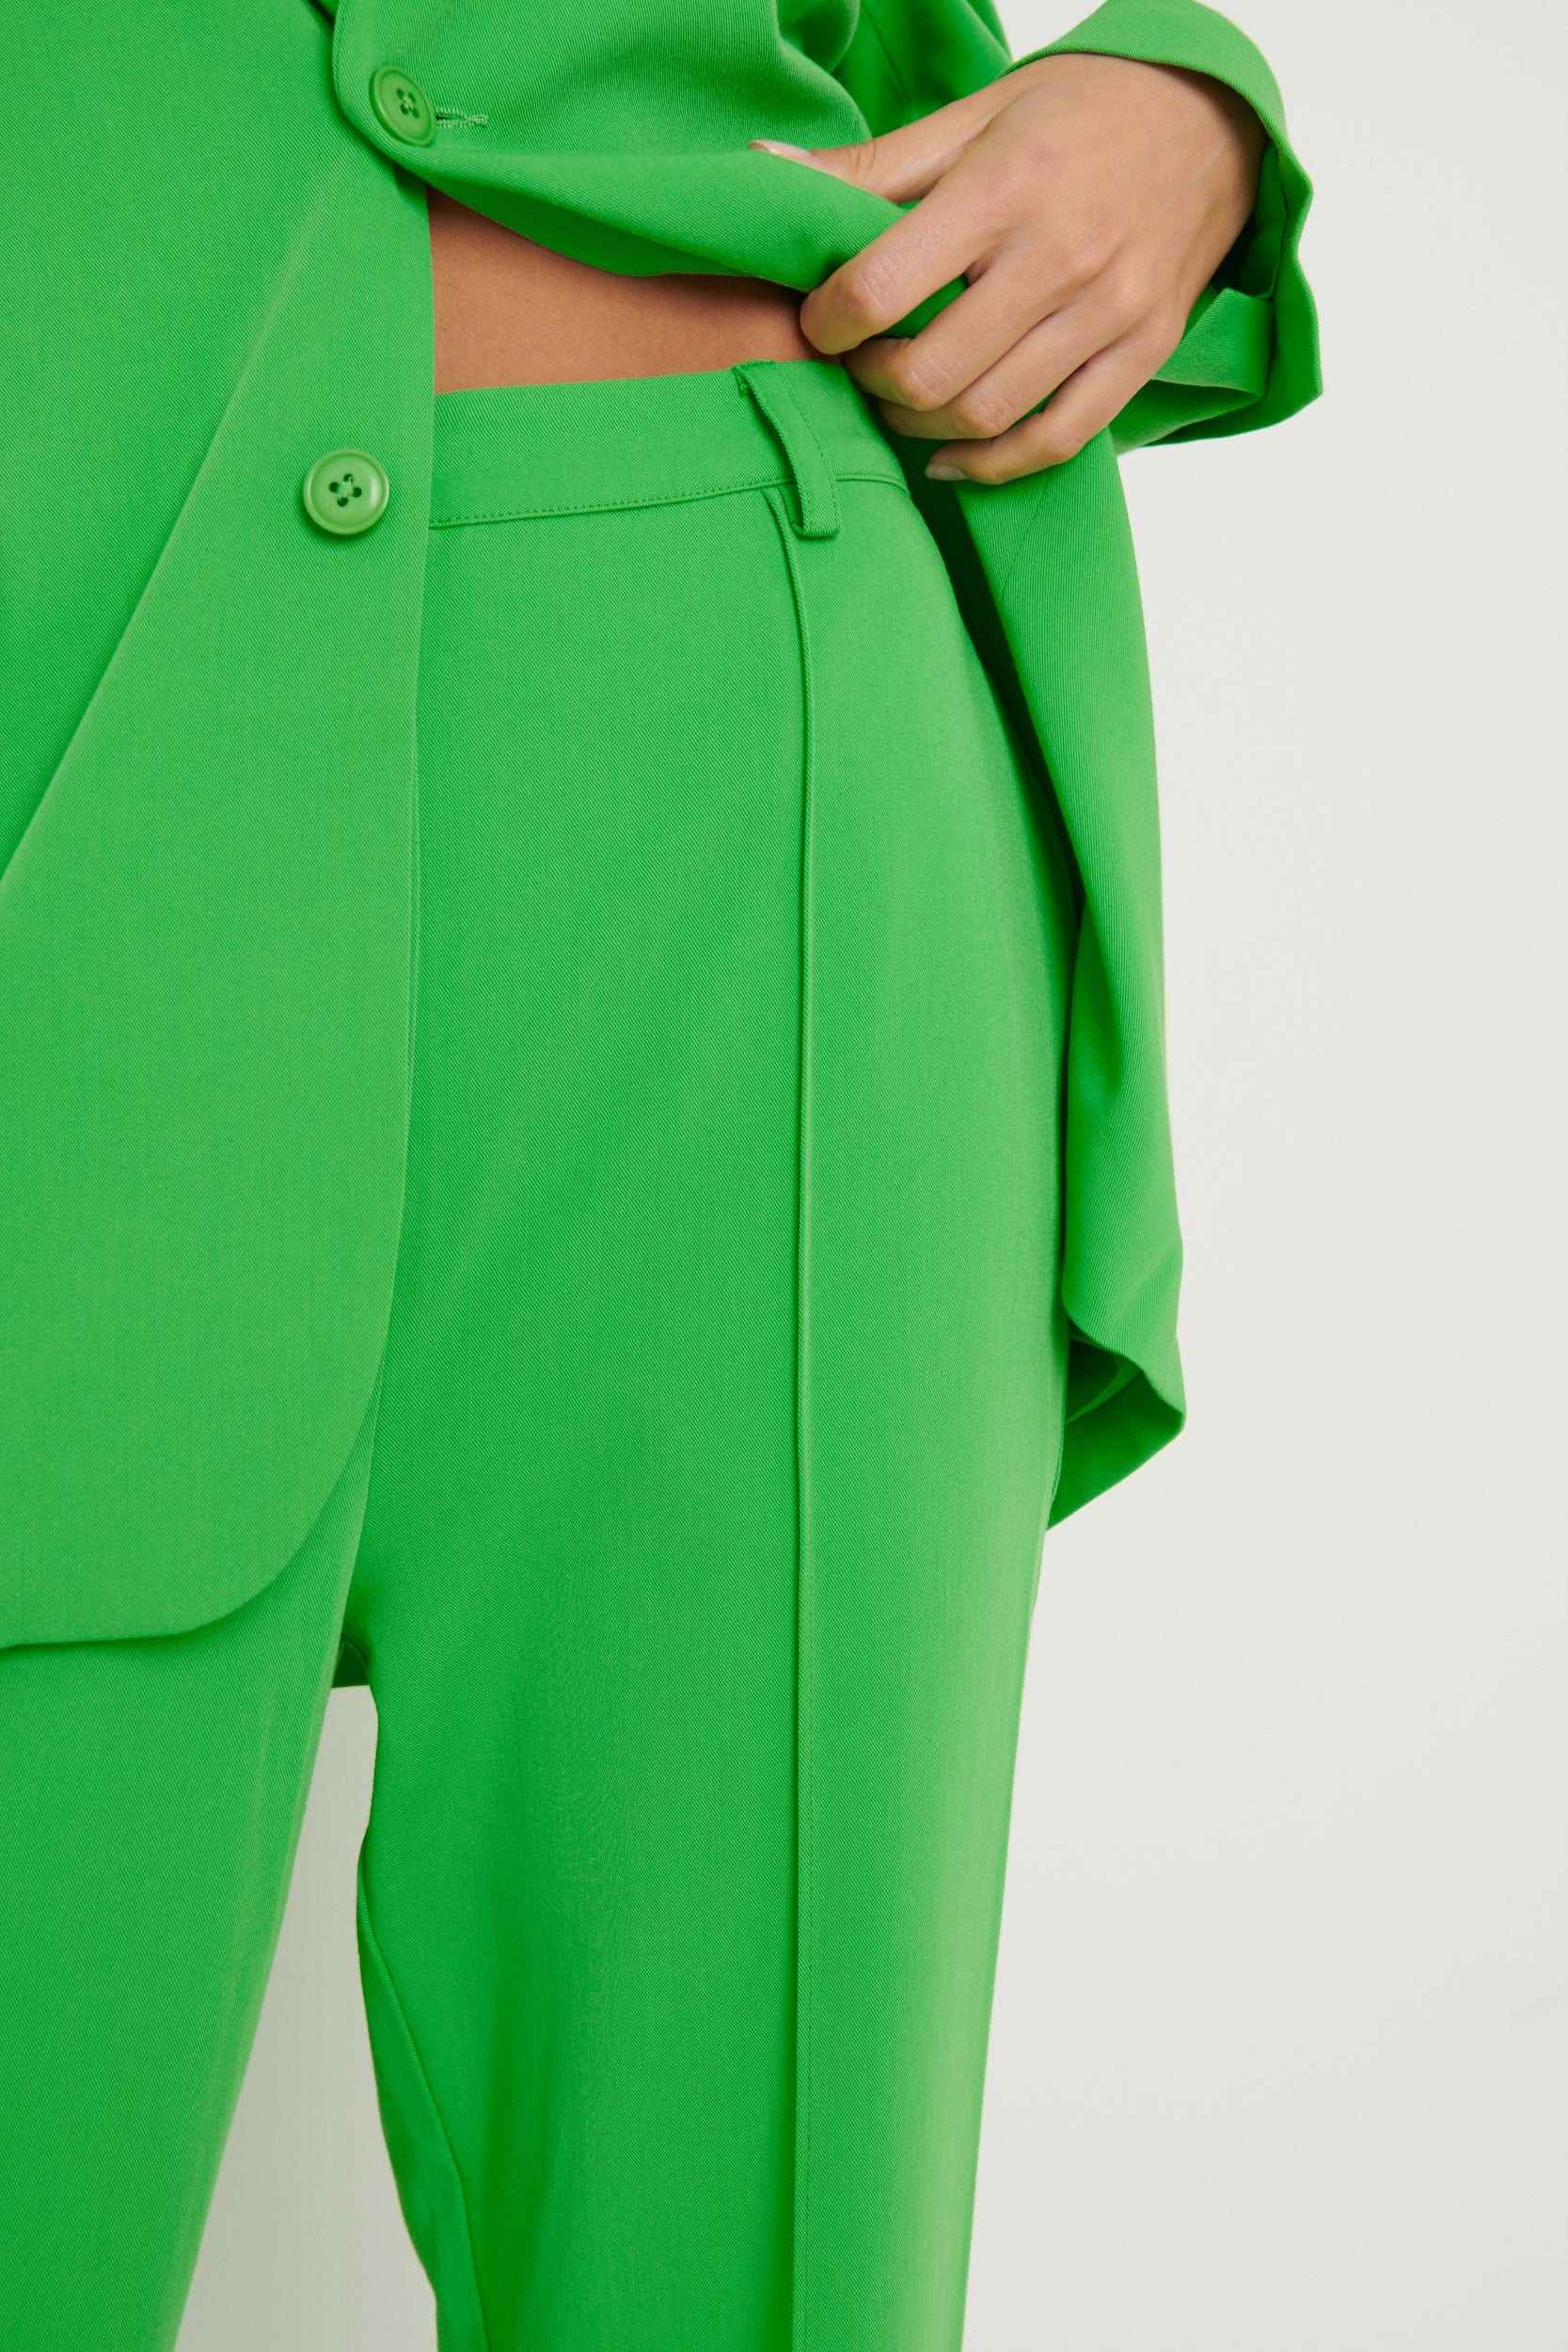 Bright Green High Waist Tailored Trousers  Quiz Clothing